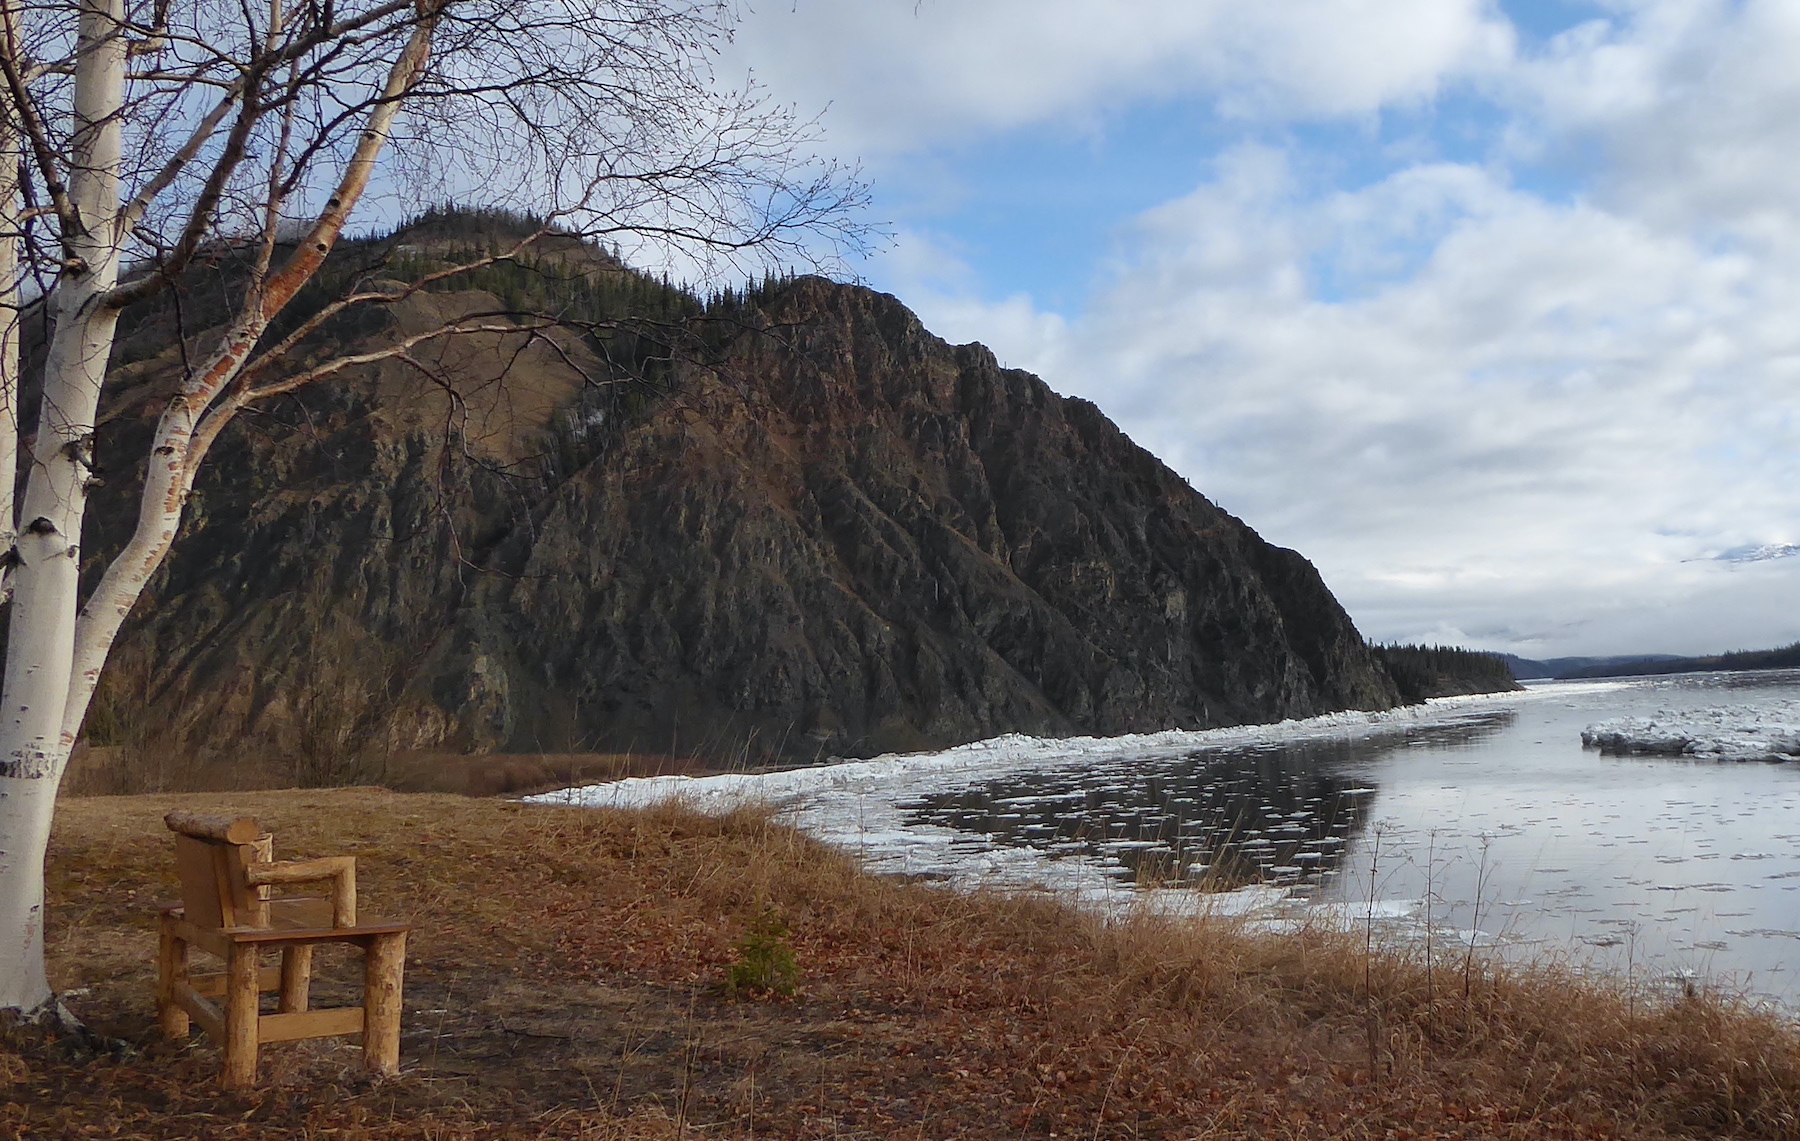 Crushed river ice lies on the bank below a large cliff. In the foreground, a bench sits under a birch tree overlooking the river.